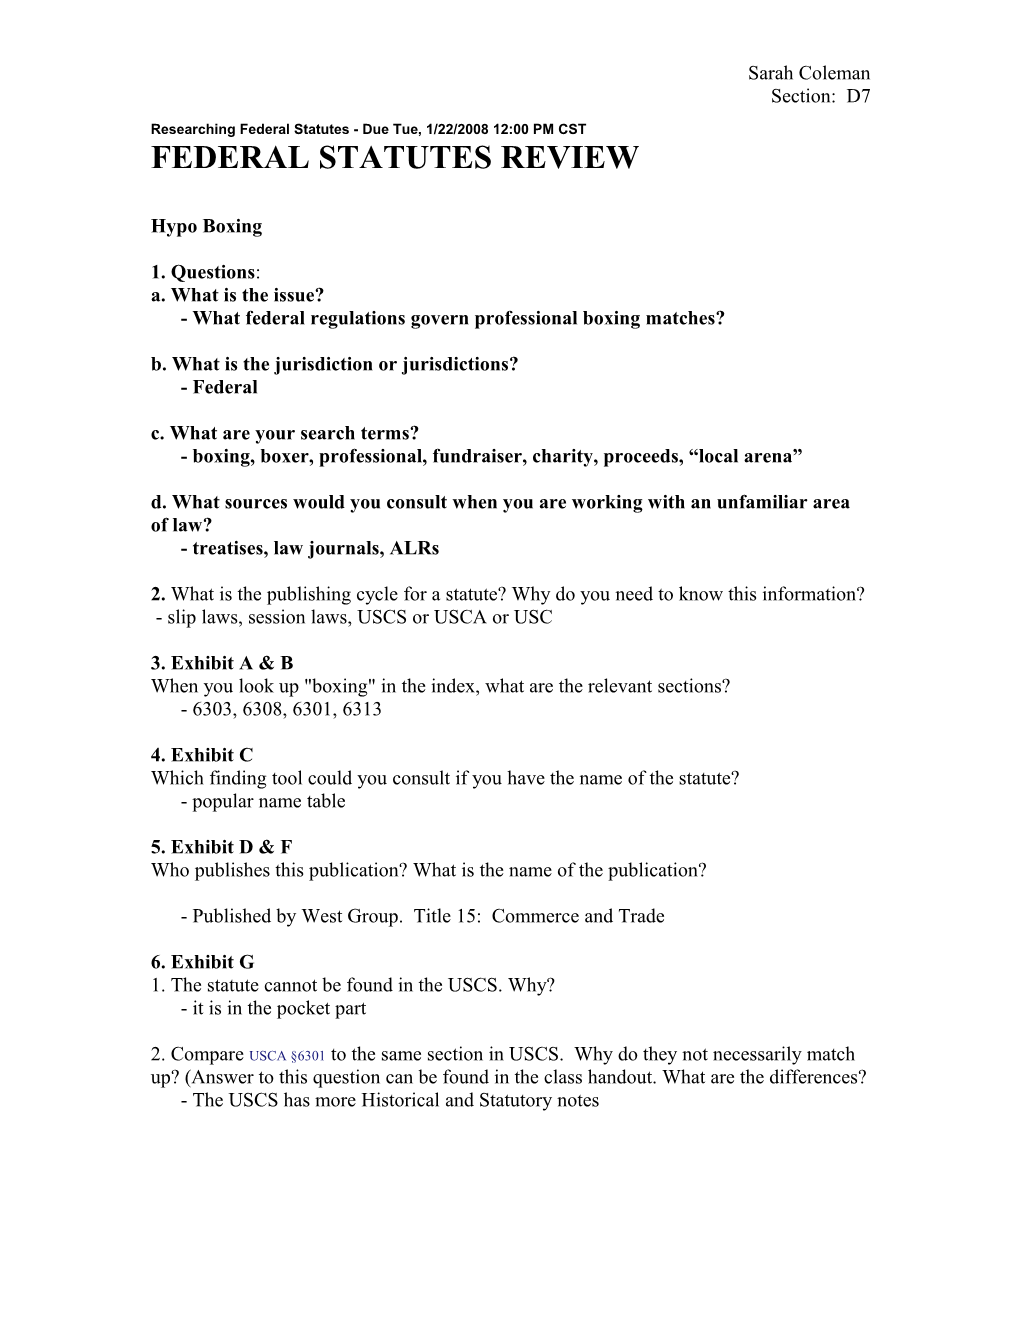 Researching Federal Statutes - Due Tue, 1/22/2008 12:00 PM CST